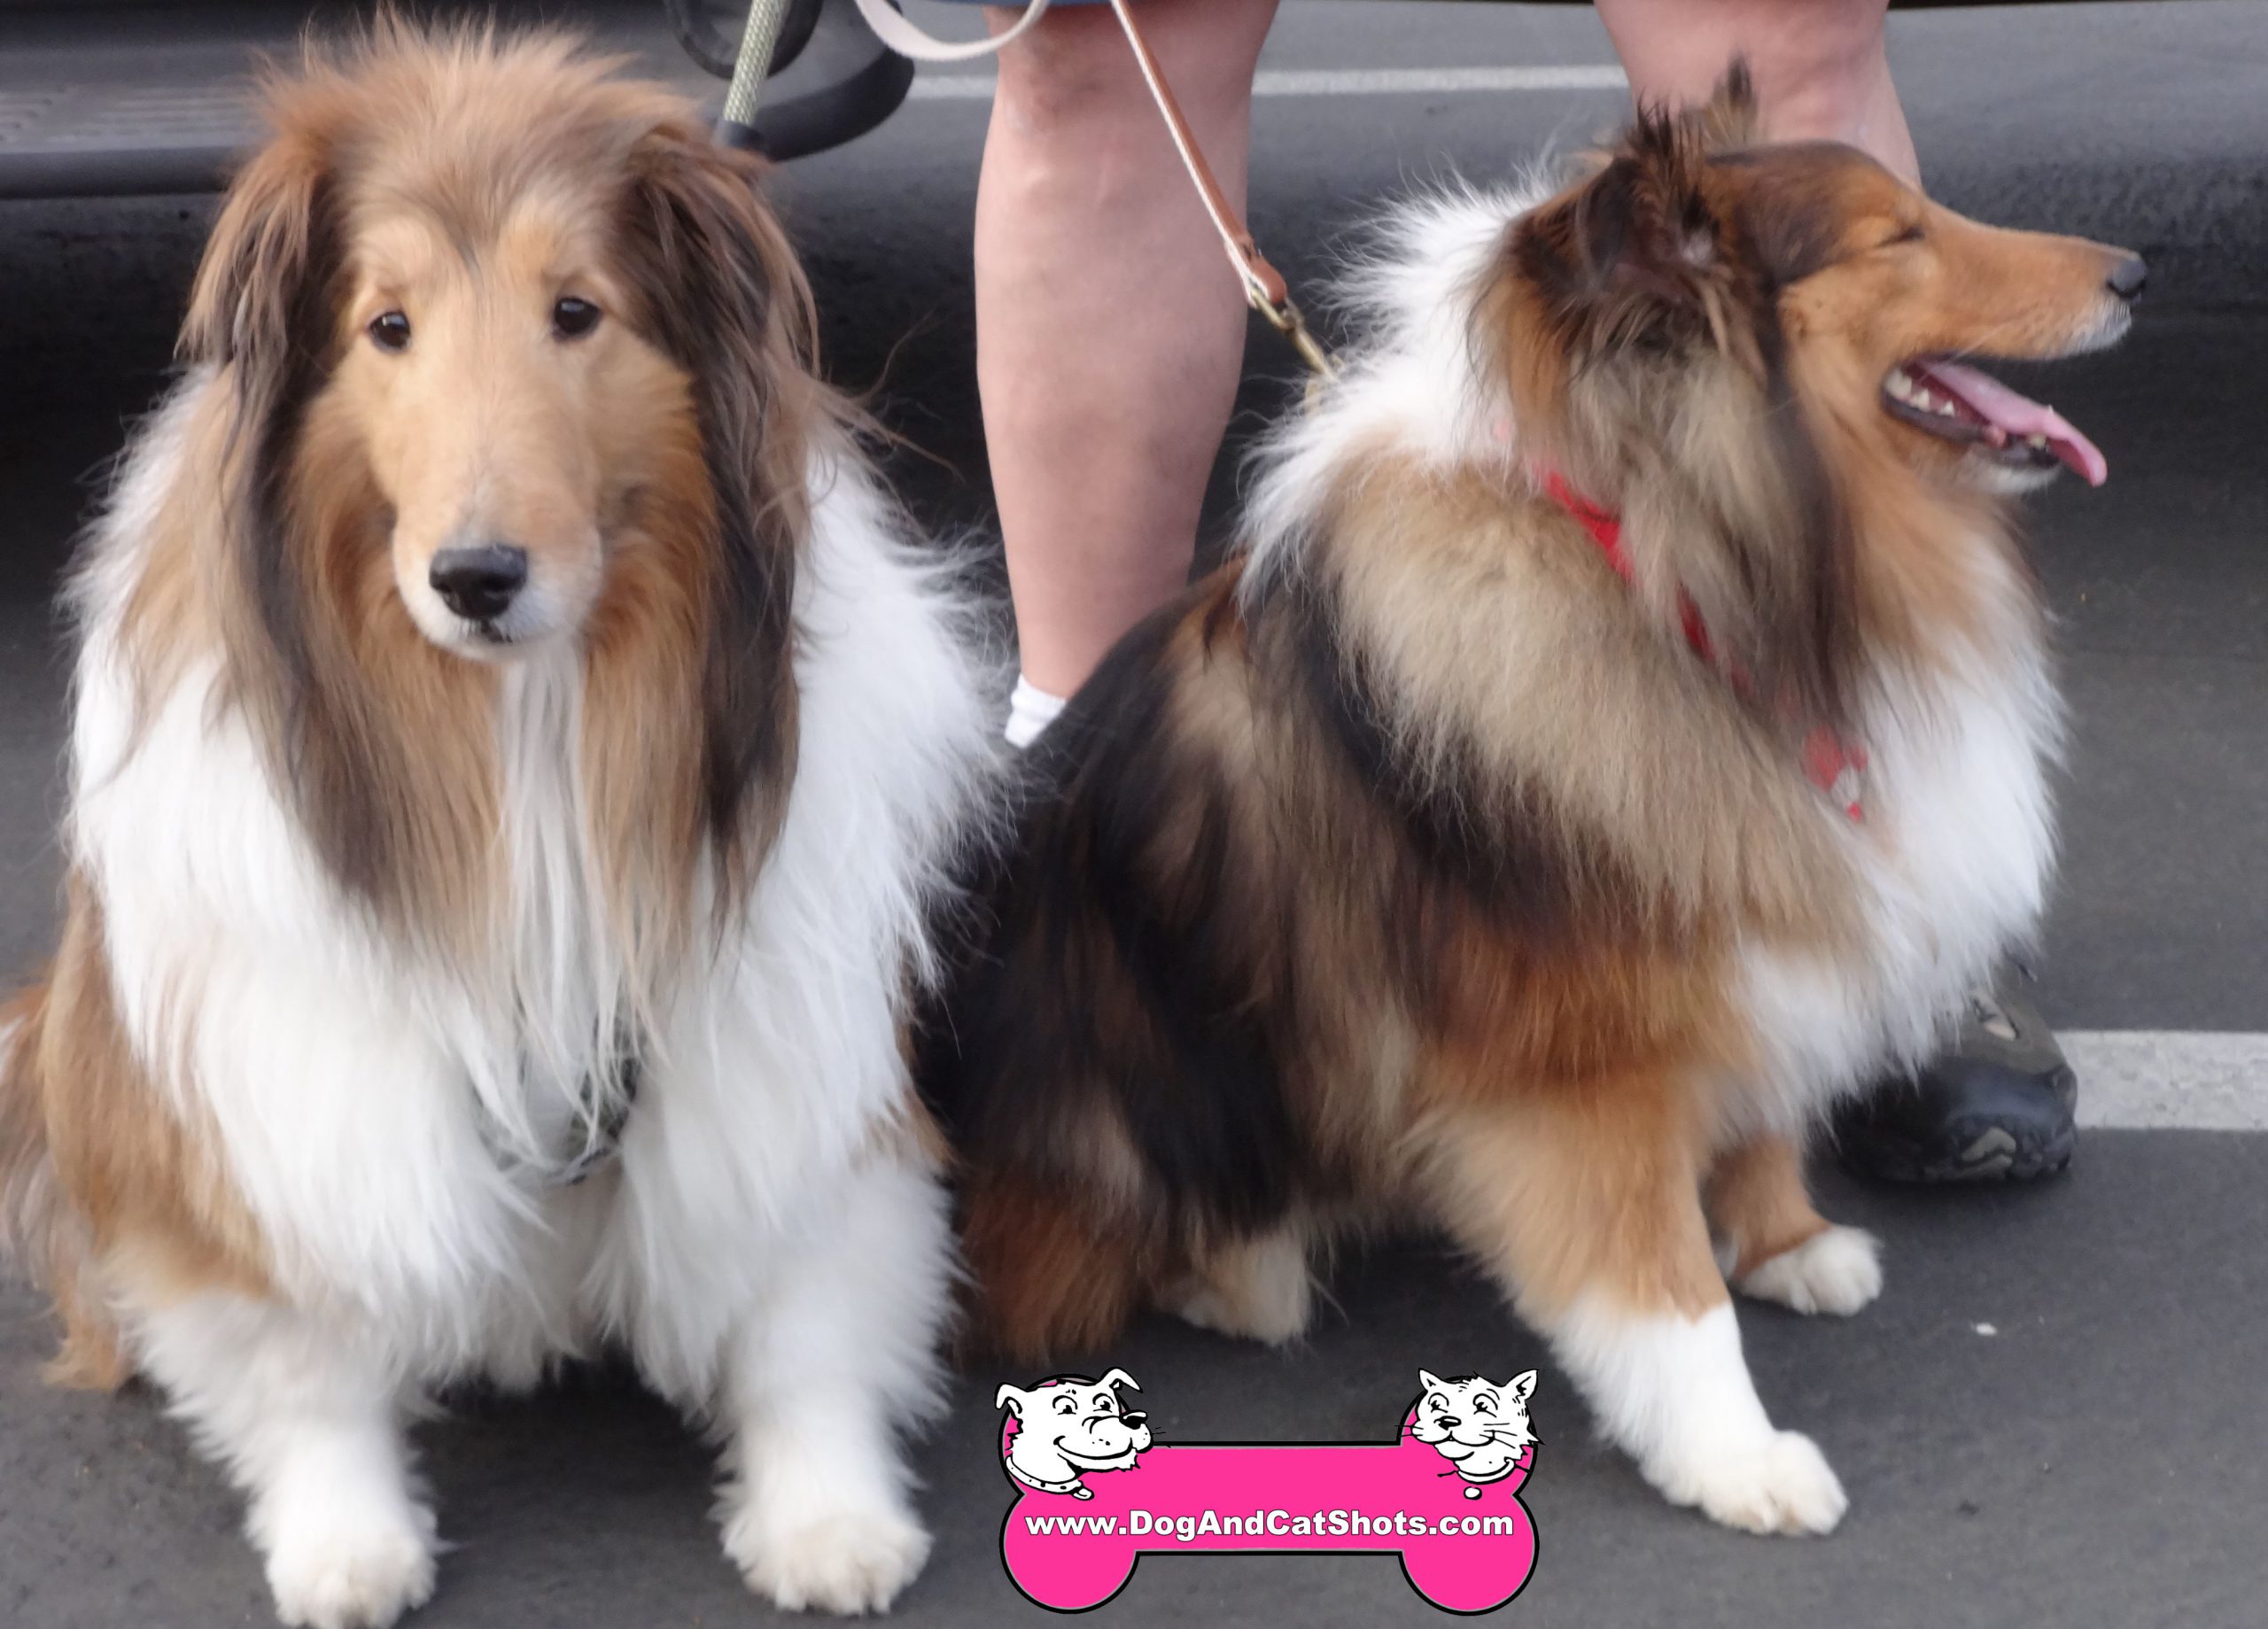 Apollo and Orion the Shelties